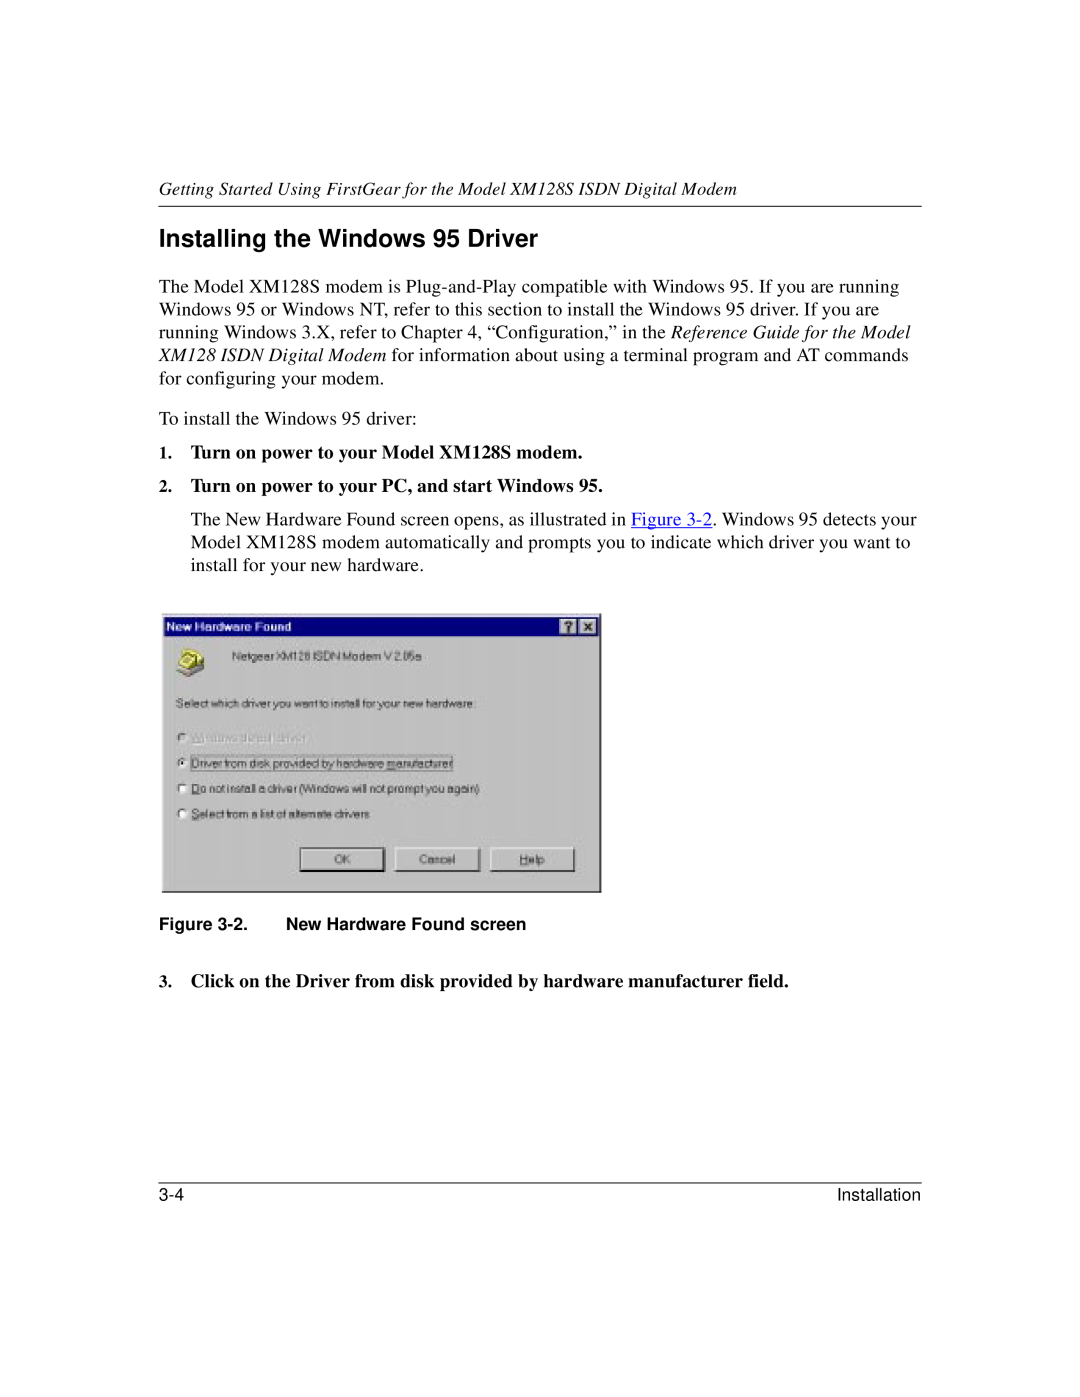 NETGEAR manual Installing the Windows 95 Driver, Turn on power to your Model XM128S modem 